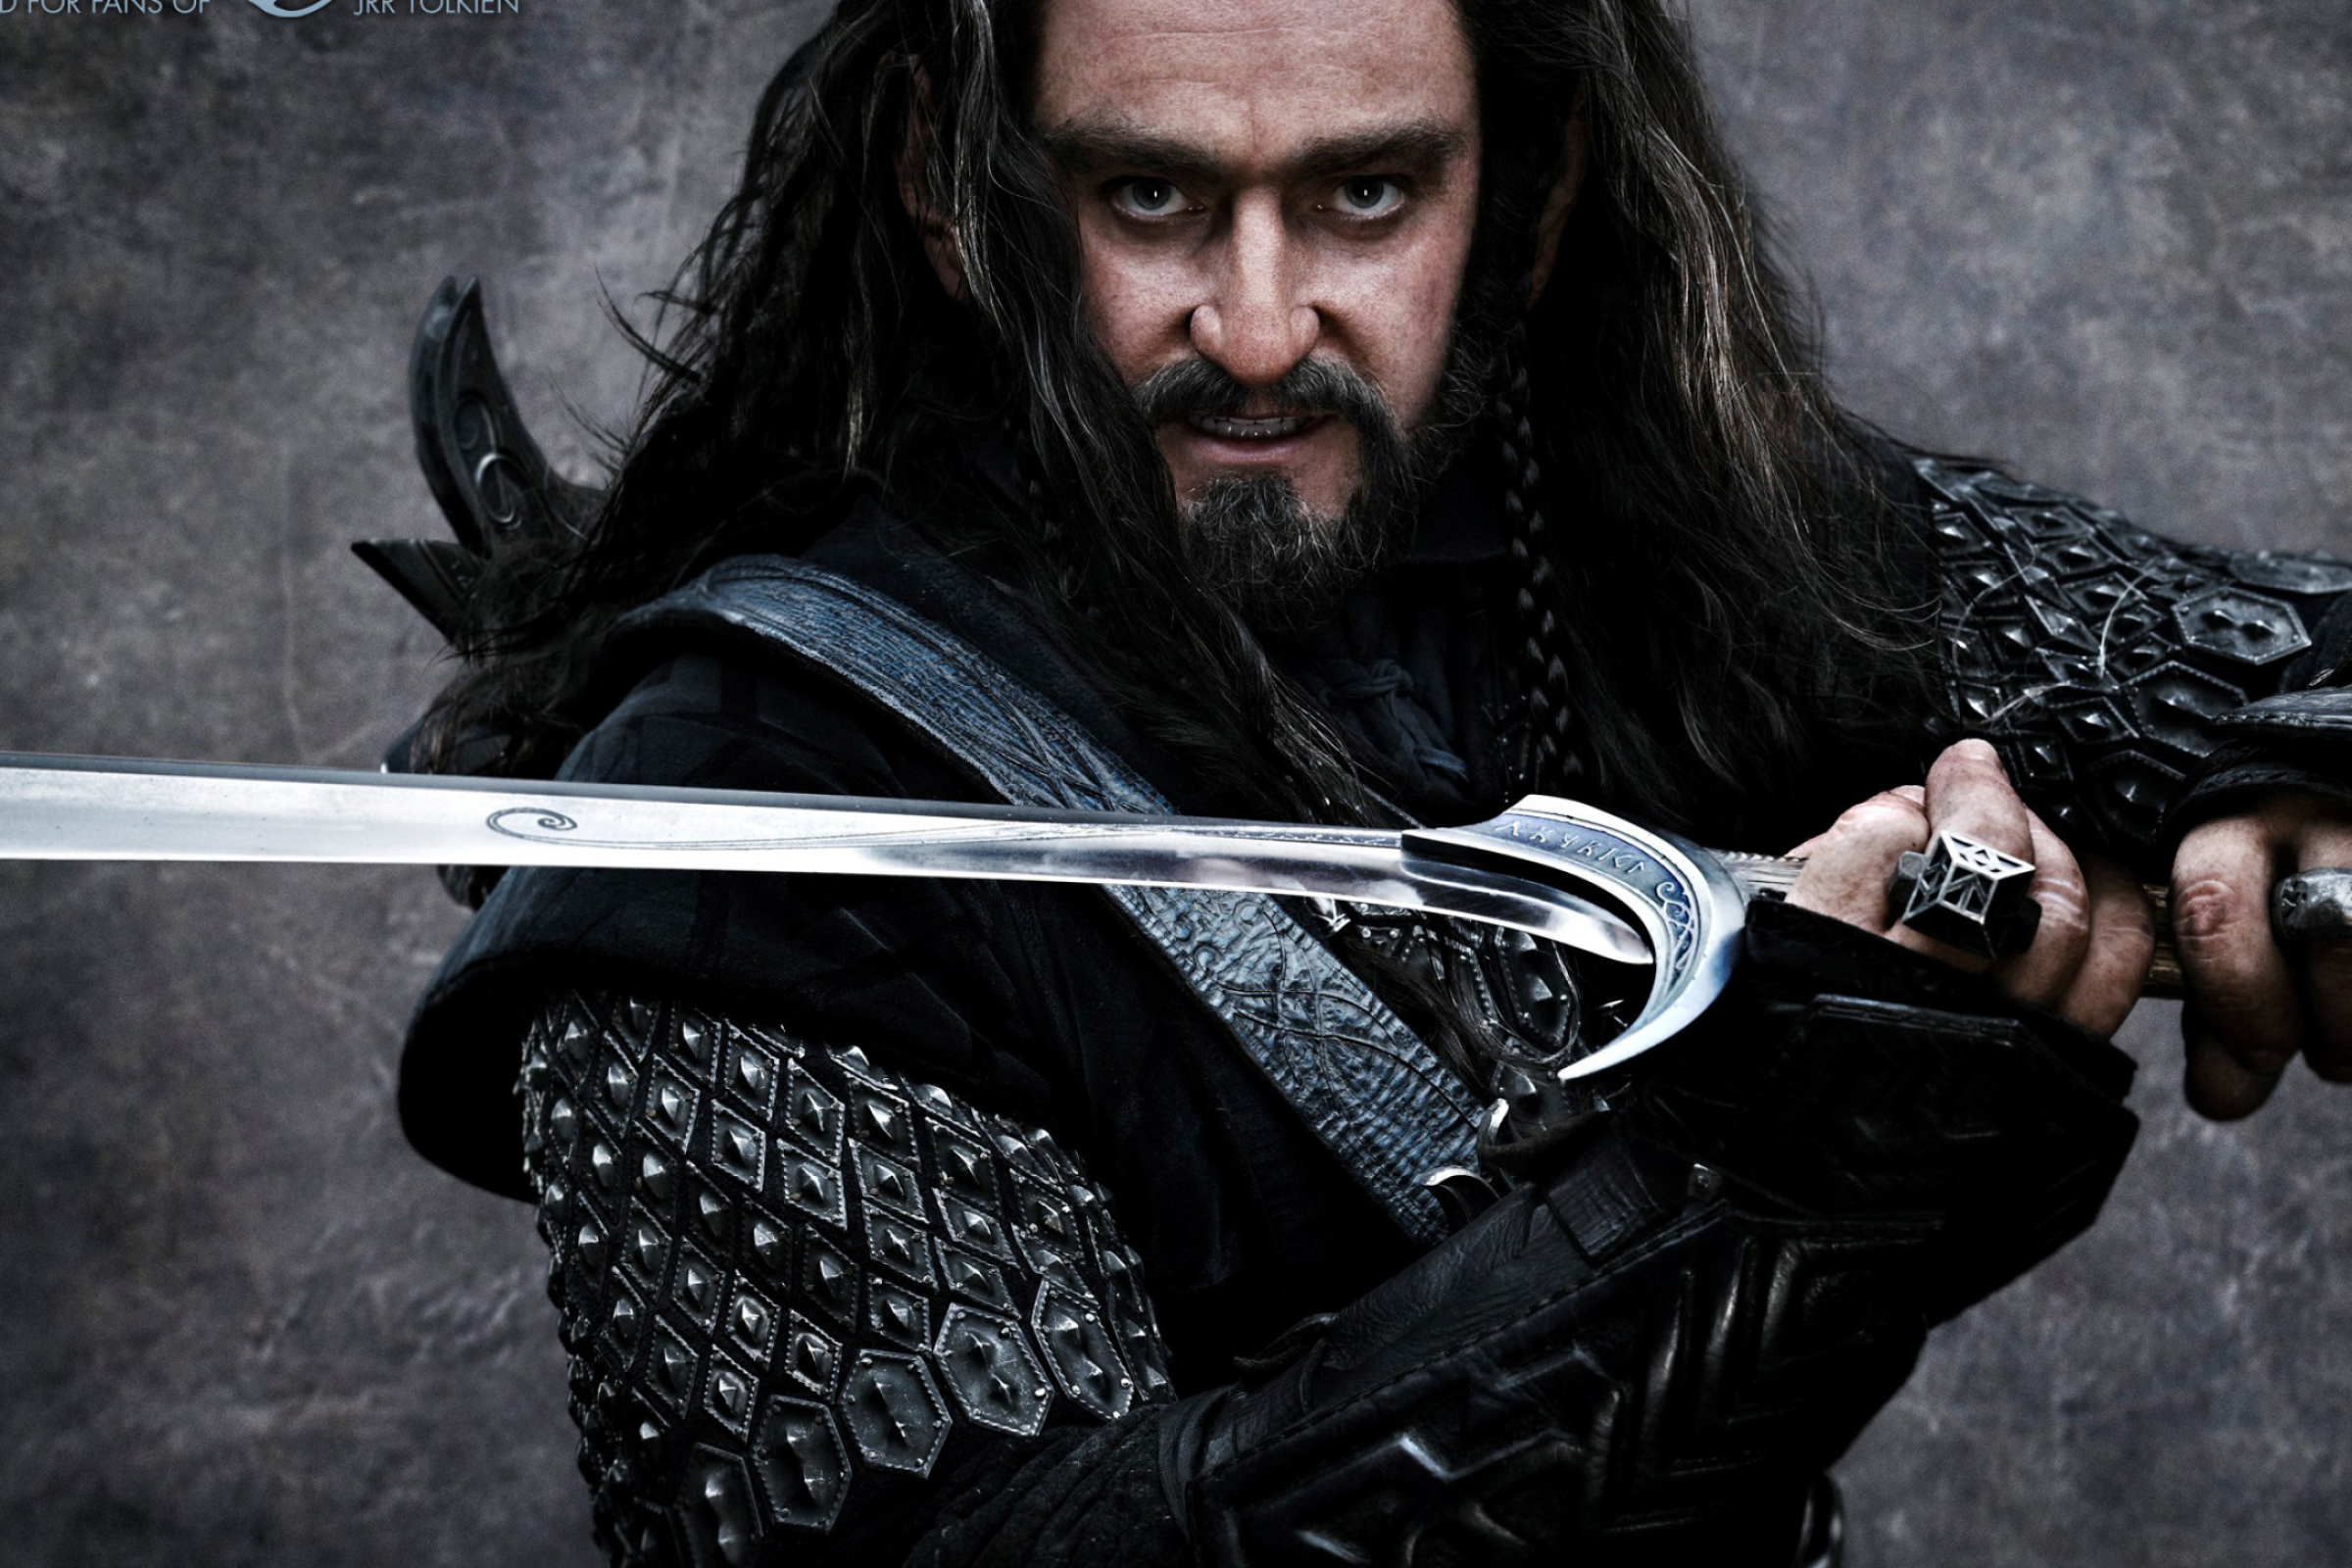 2400x1600 The Hobbit Movie Dwarf Listing First Look at Richard Armitage as Thorin | Lord of the Rings Rings of Power on Amazon Prime News, JRR Tolkien, The Hobbit and more